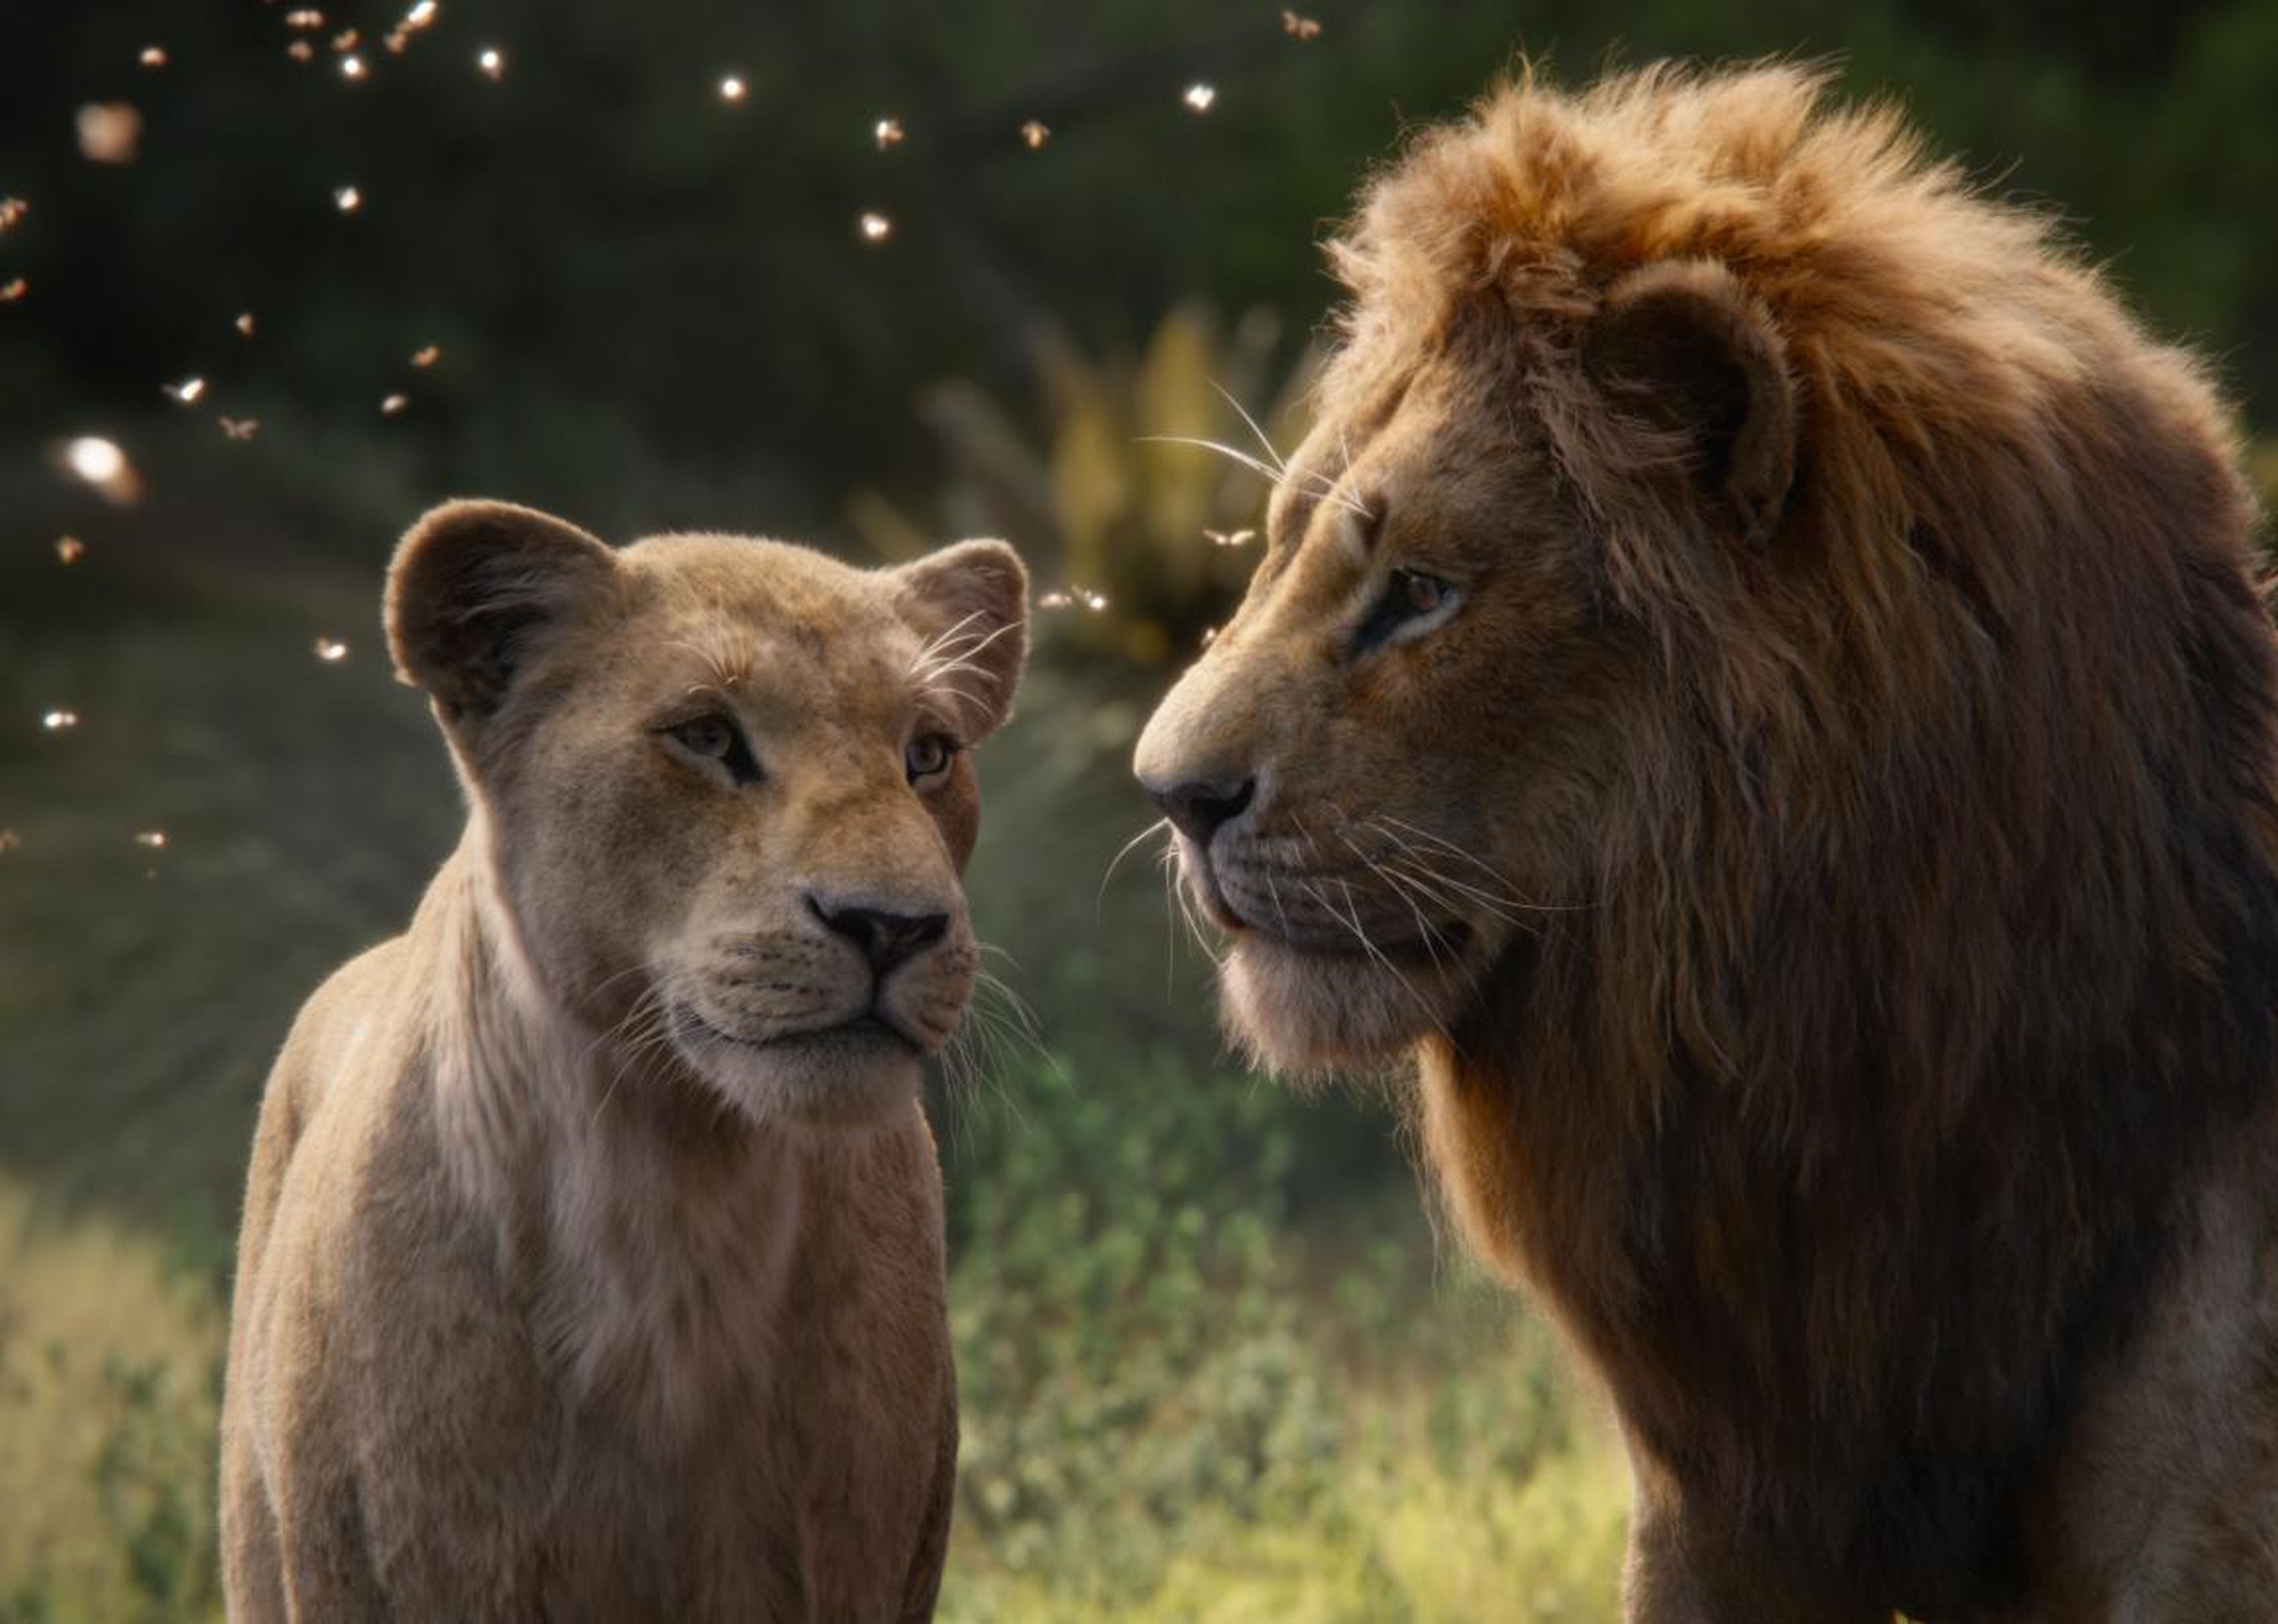 4. "The Lion King" (2019)